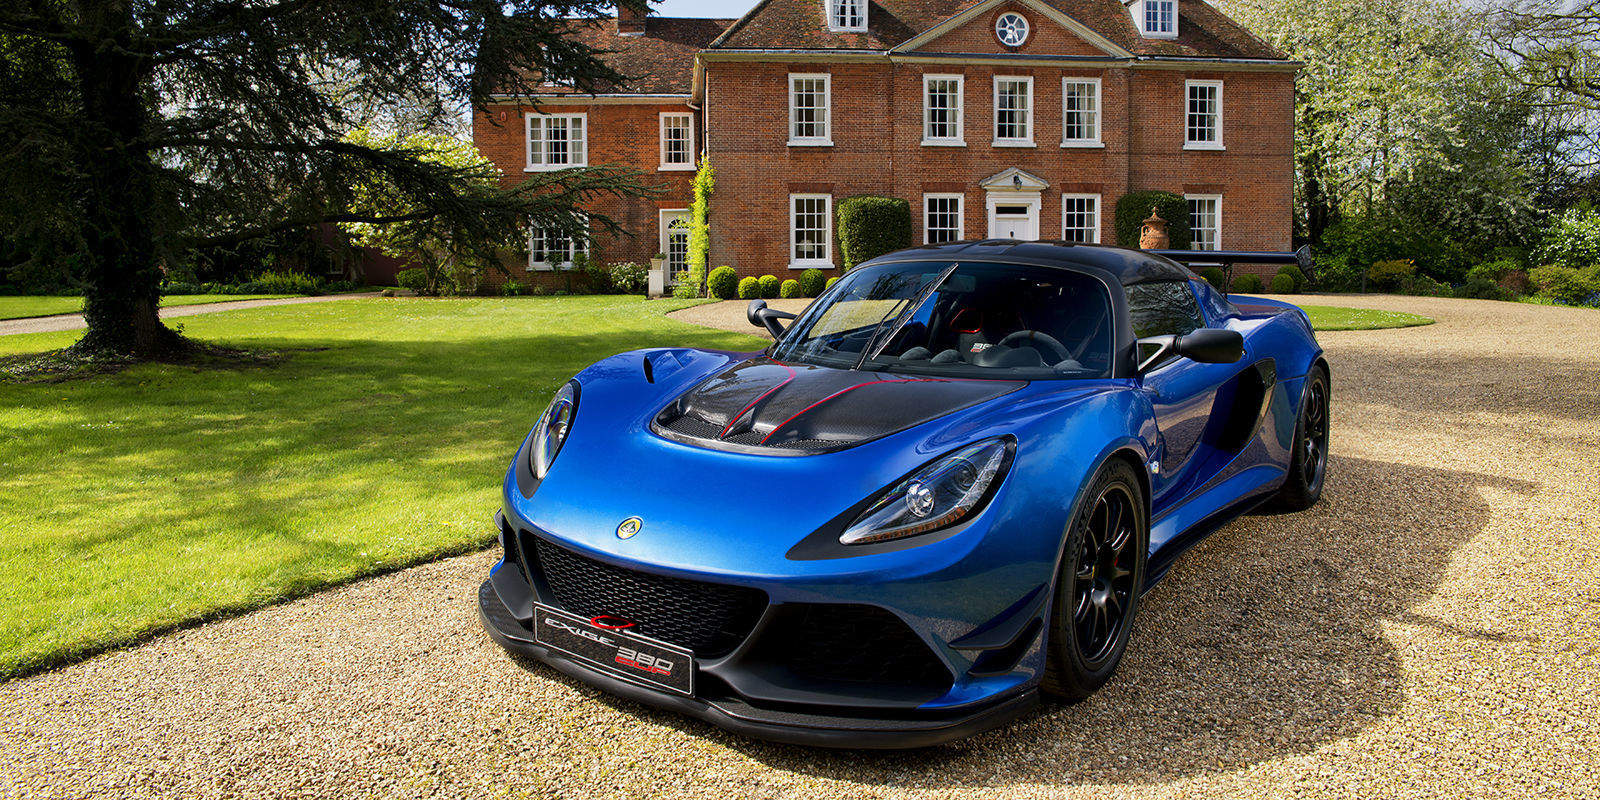 Lotus Exige 380 CUP Gallery-1492703965-lotus-exige-cup-380-front-3qtrs-1